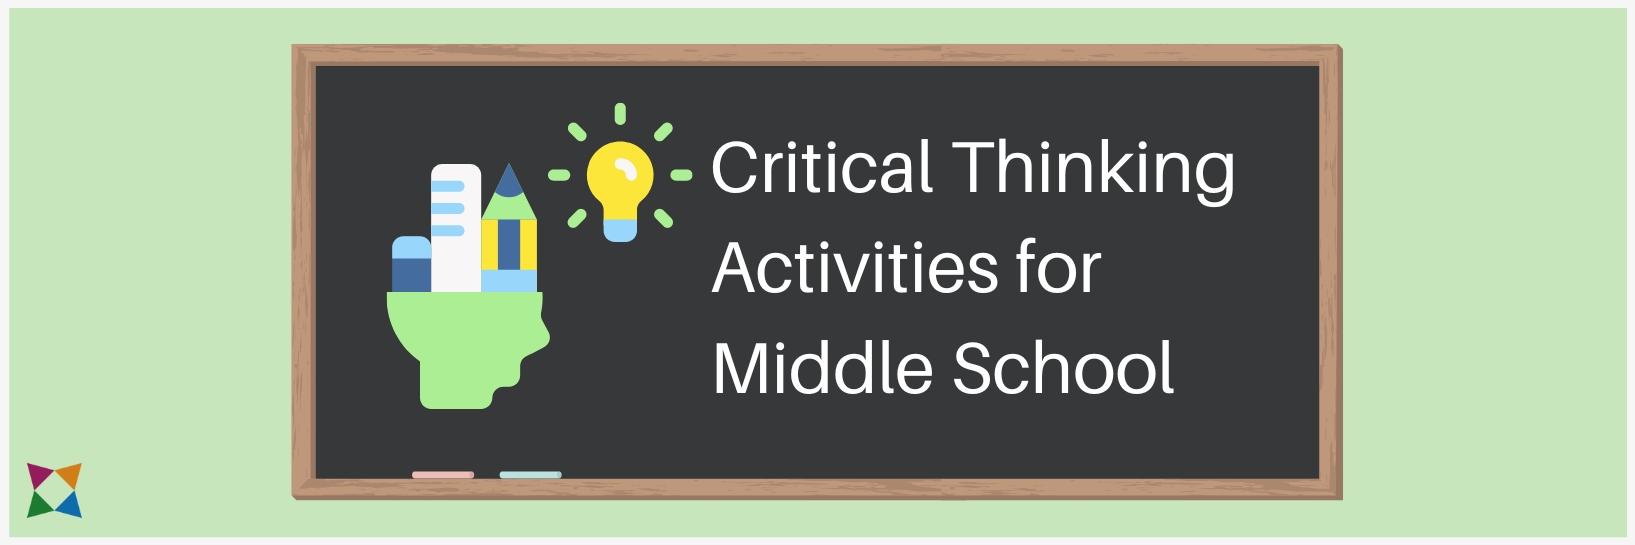 fun critical thinking activities for middle school